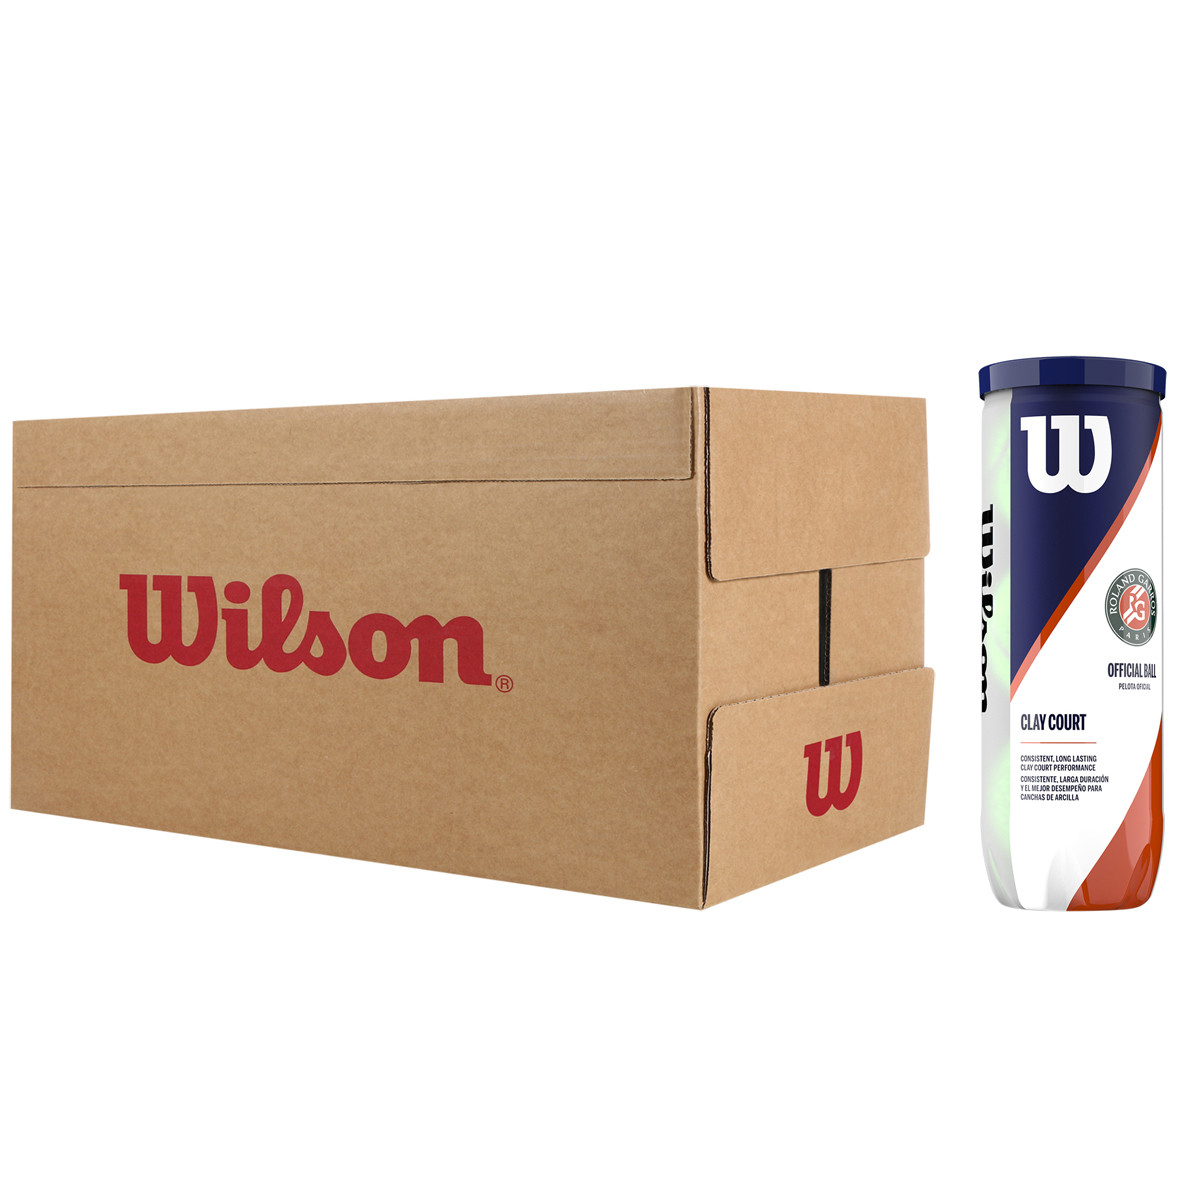 CASE OF 24 CANS OF 3 WILSON ROLAND GARROS OFFICIAL CLAY BALLS